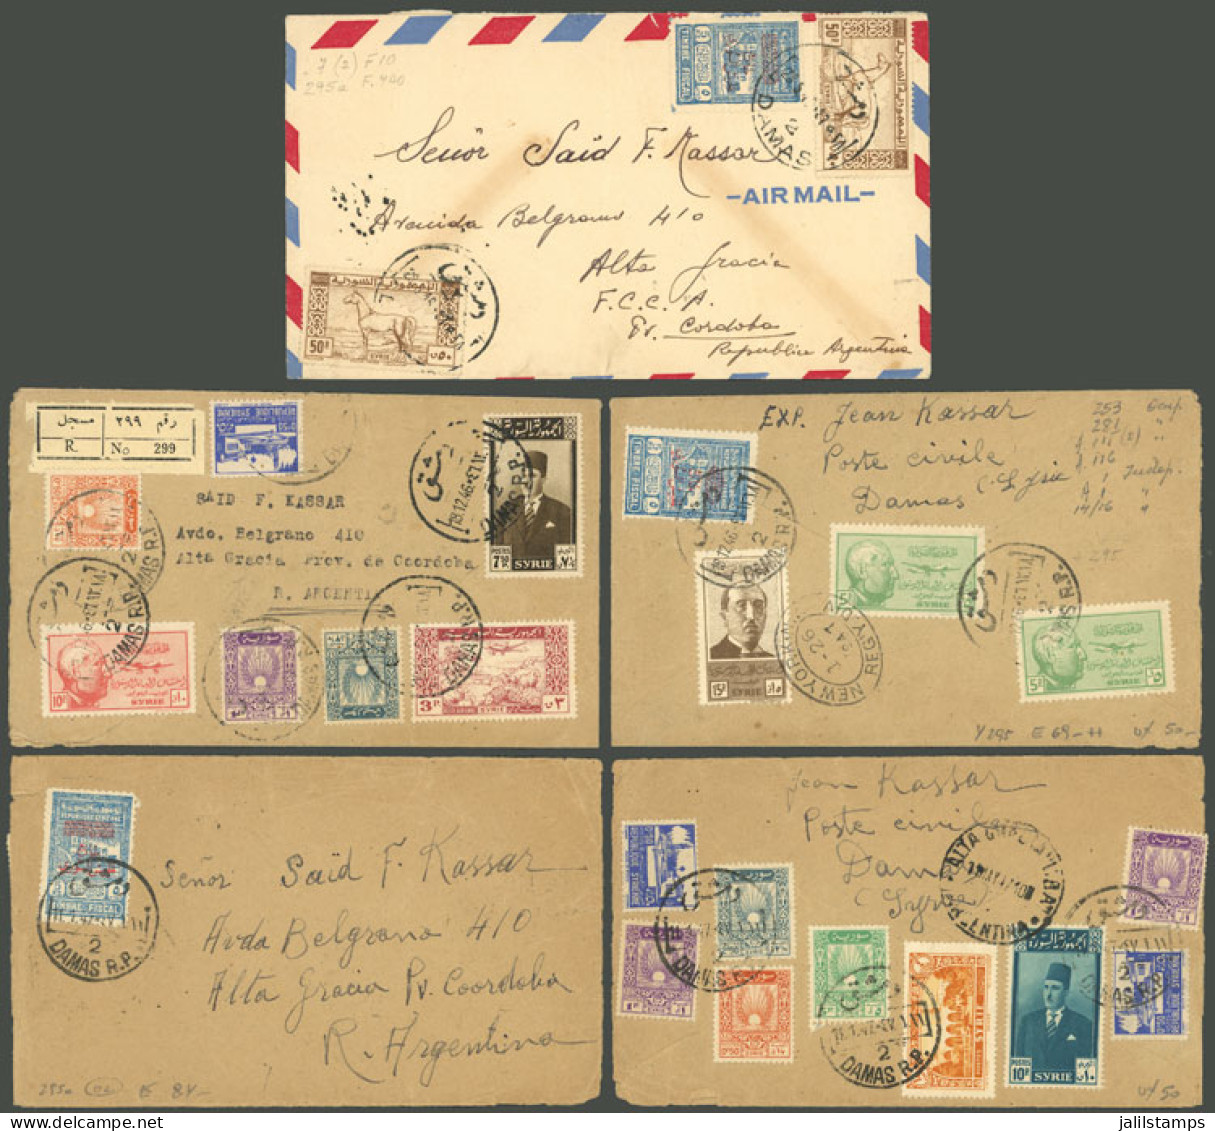 SYRIA: 3 Covers Sent To Argentina In 1946/7, Attractive Frankings, Nice Lot! - Syria